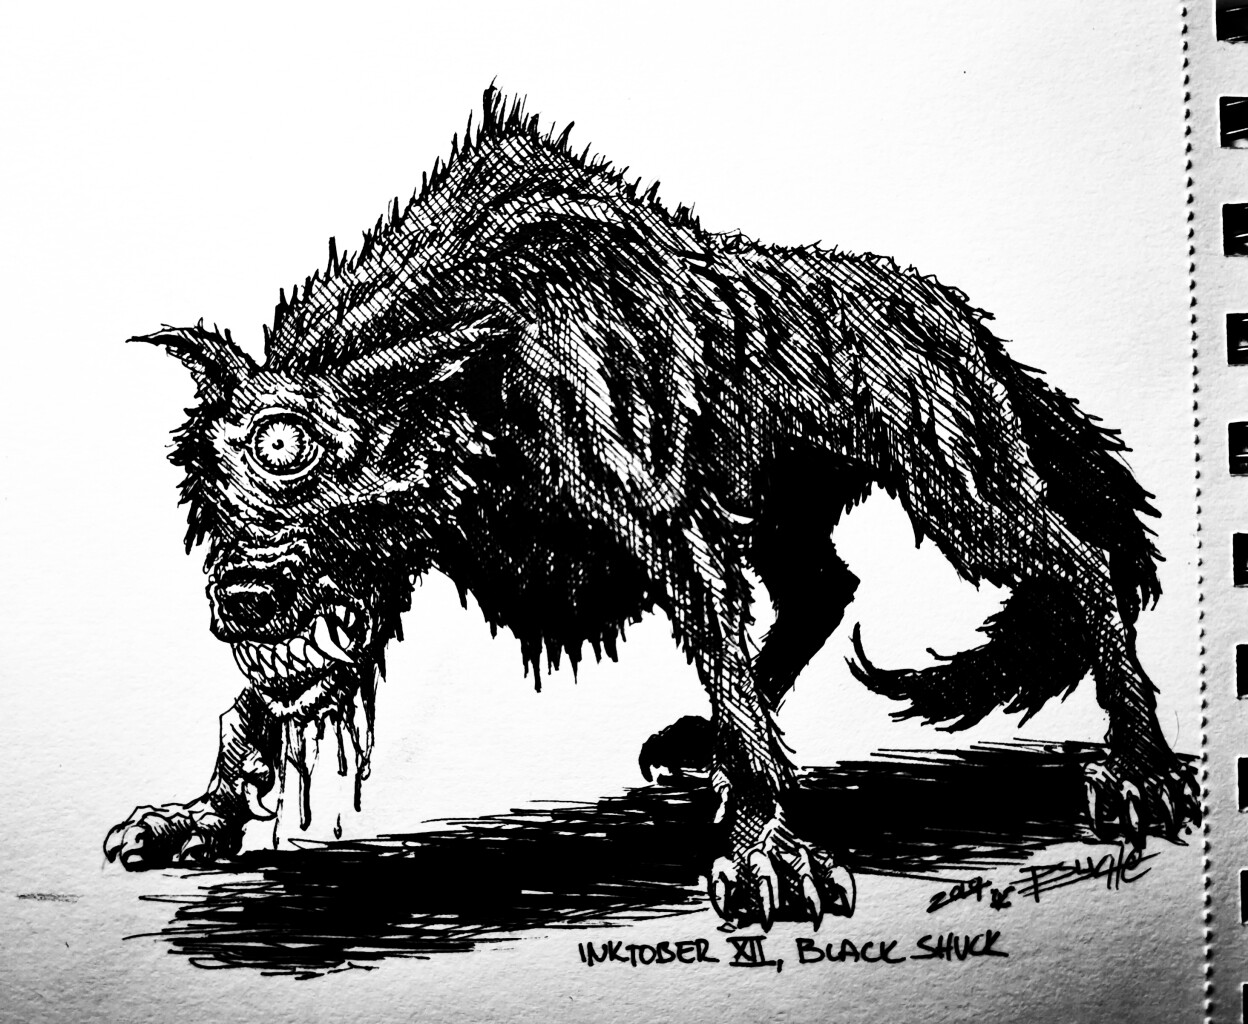 Black Shuck - For centuries, inhabitants of England have told tales of a large black dog with malevolent flaming eyes (or in some variants of the legend a single eye) that are red or alternatively green. They are described as being 'like saucers'.